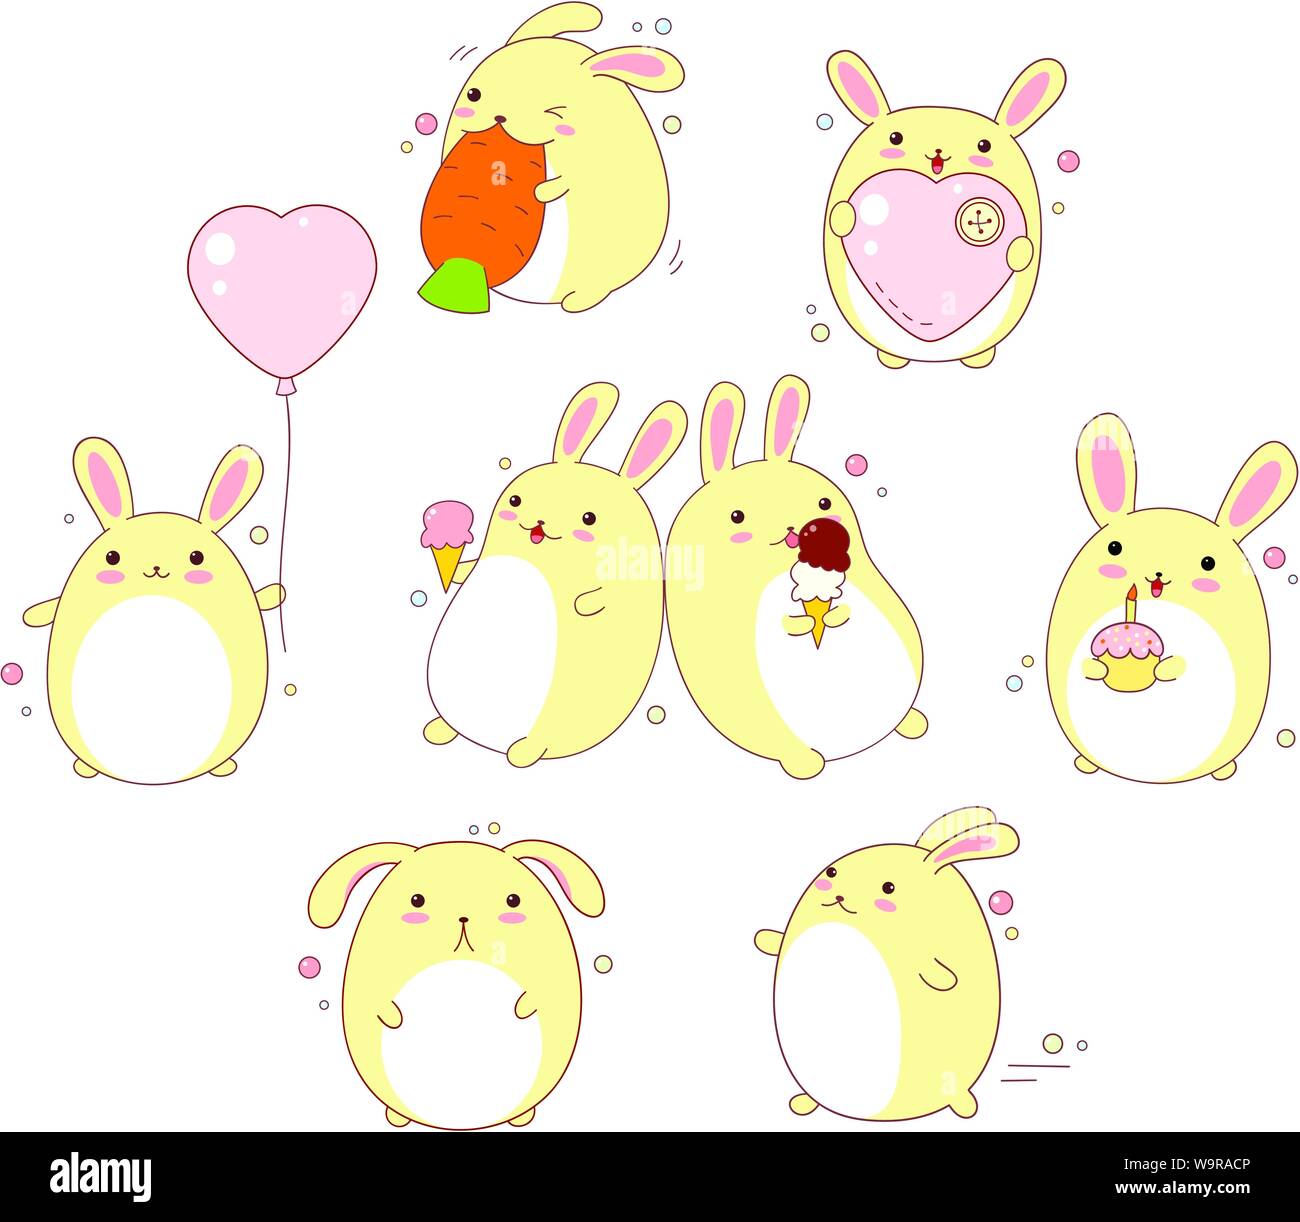 Collection of cute rabbits with different emotions in kawaii style Stock Vector